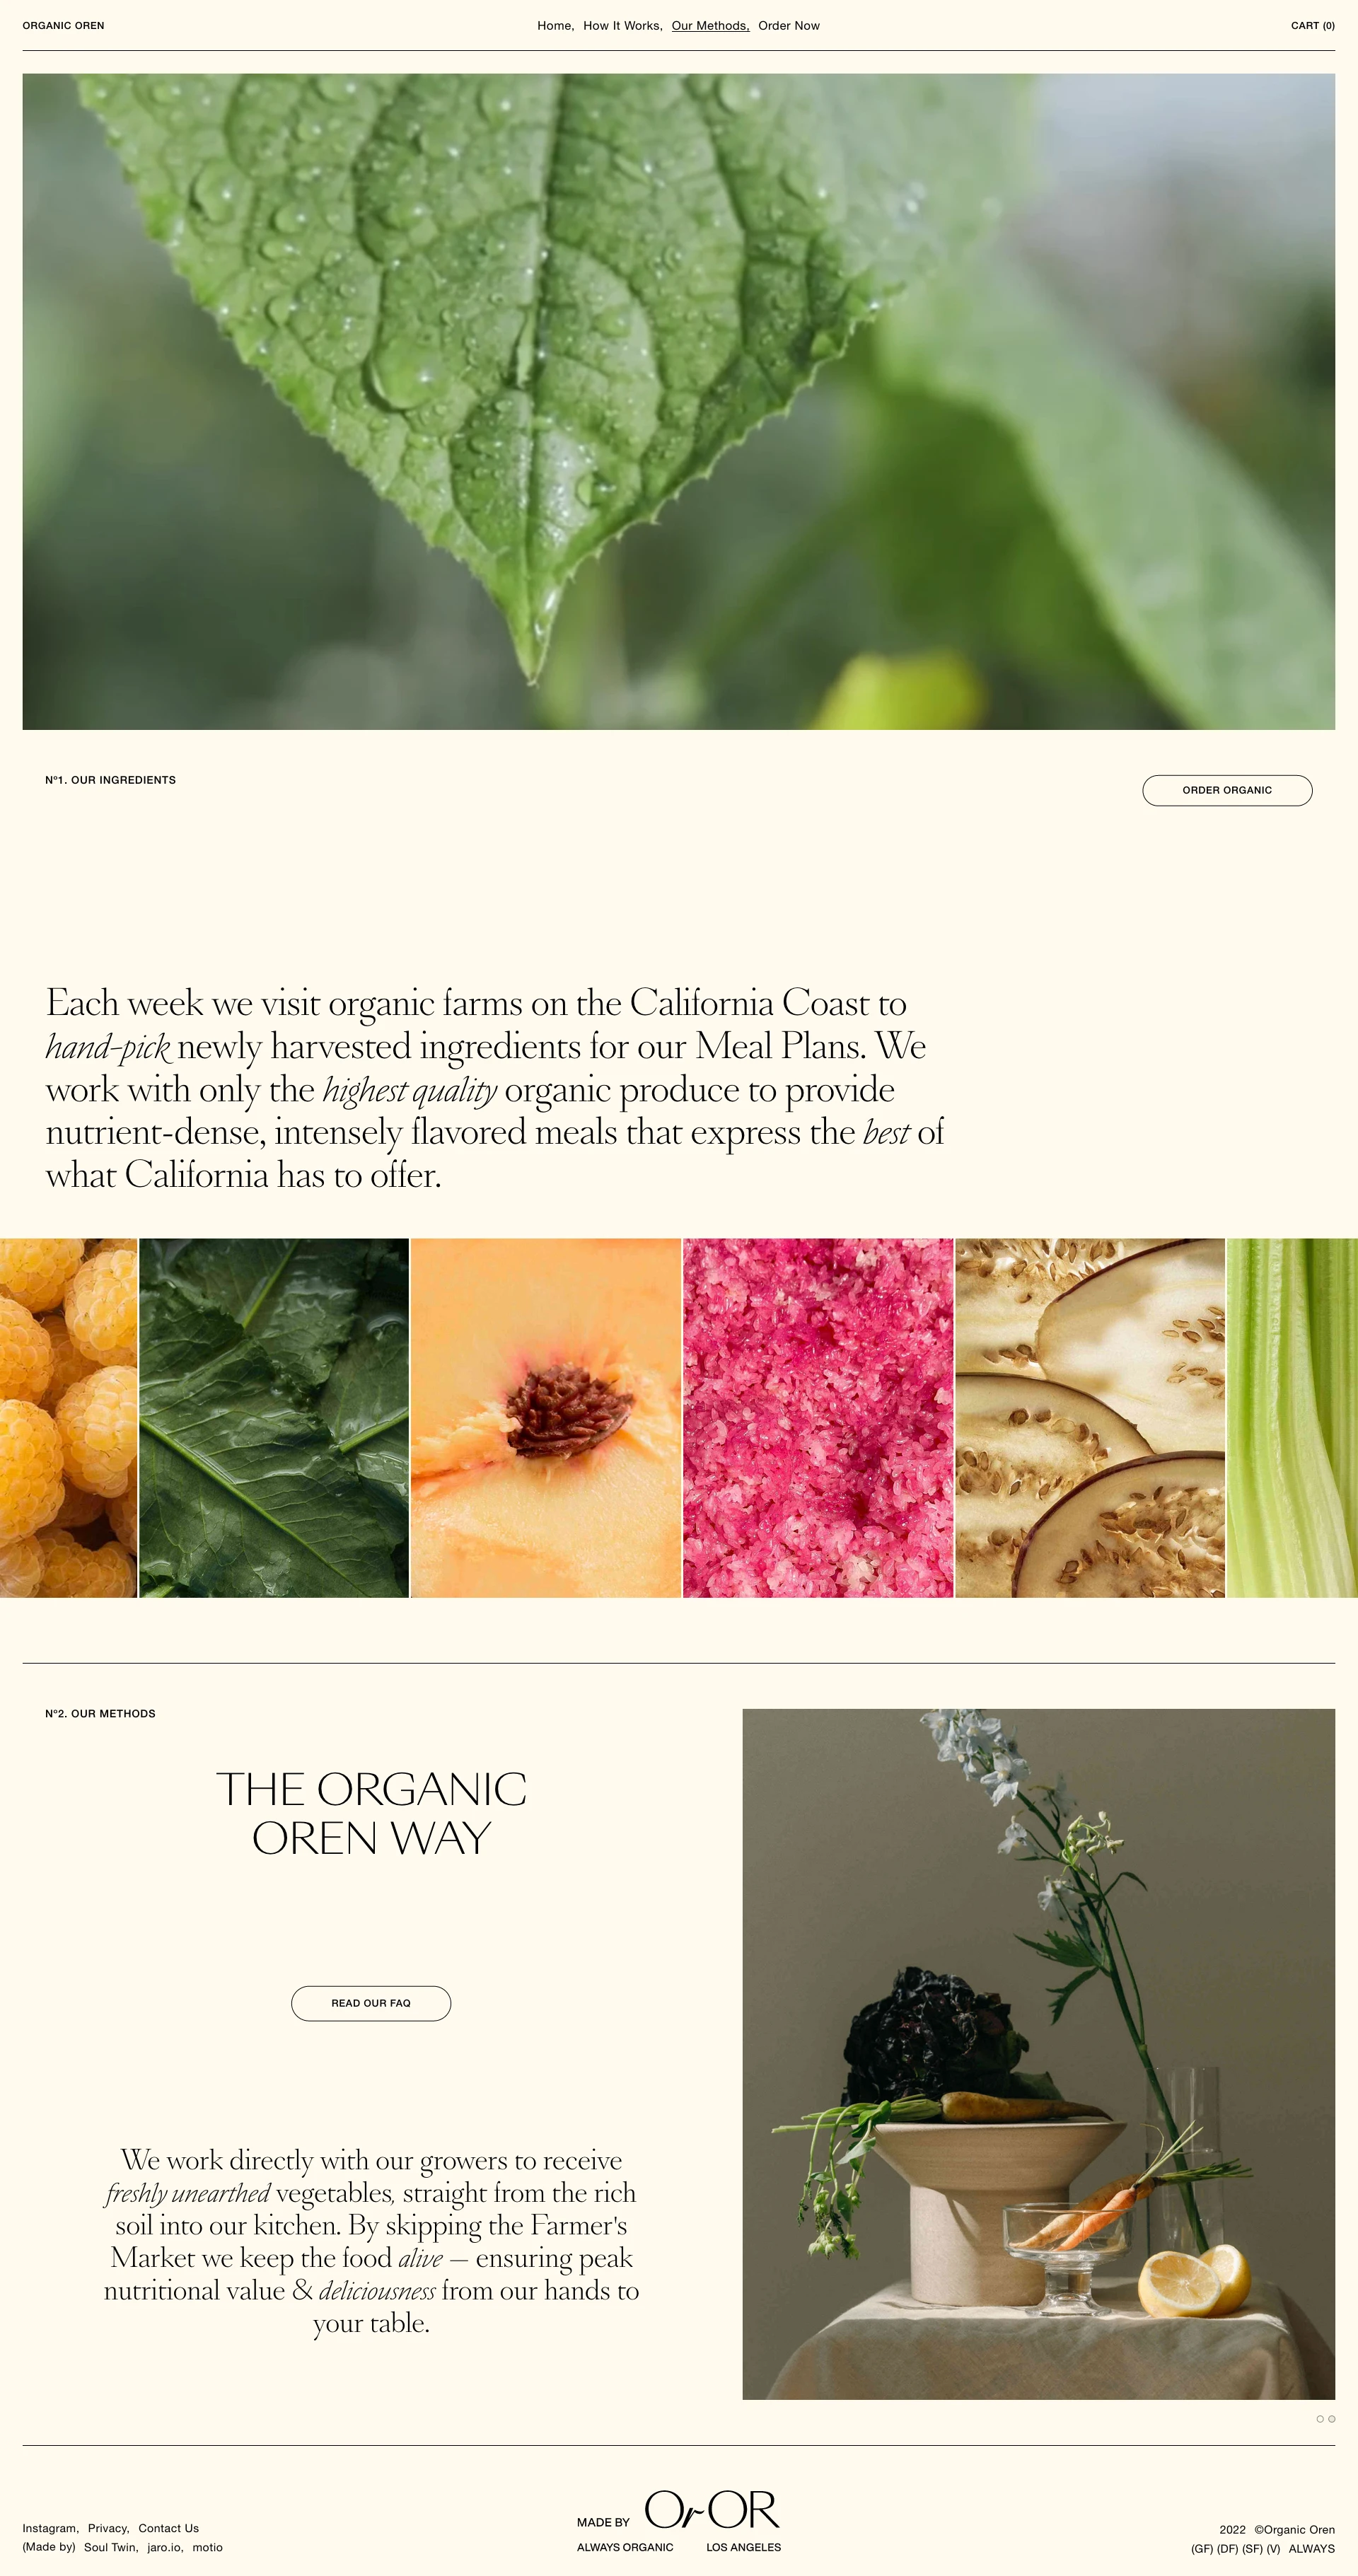 Organic Oren Landing Page Example: Organic Meals & Juices, perfectly prepped & hand-delivered. Our food is made for an active, organic lifestyle and centered around vegetables hand-picked from local farms. We believe eating healthy should be stress-free and delicious, and we like to keep you looking radiant while feeling full, energized & on the go.